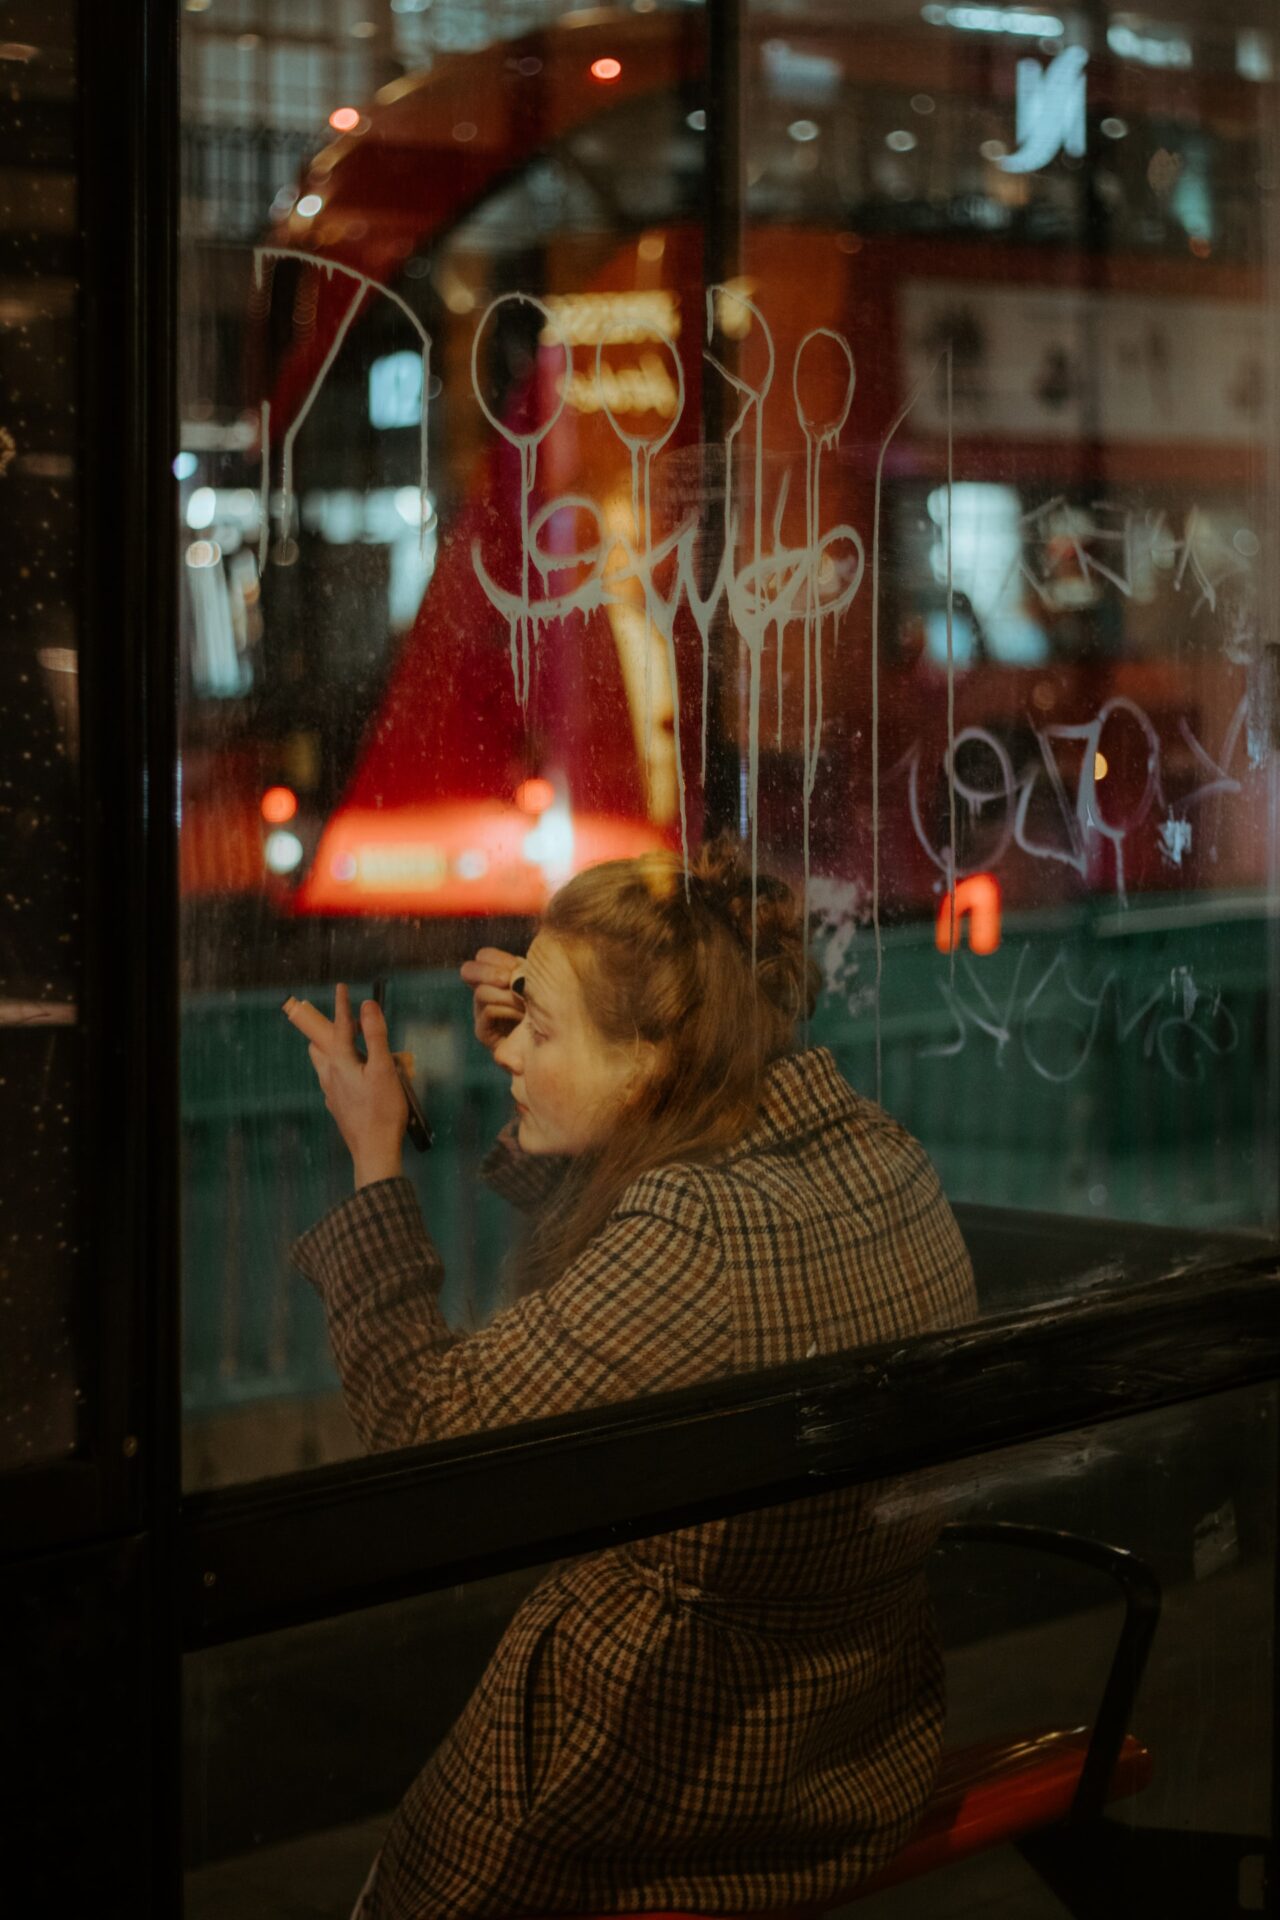 redhead girl in bus stop doing make up and a glass with graffiti